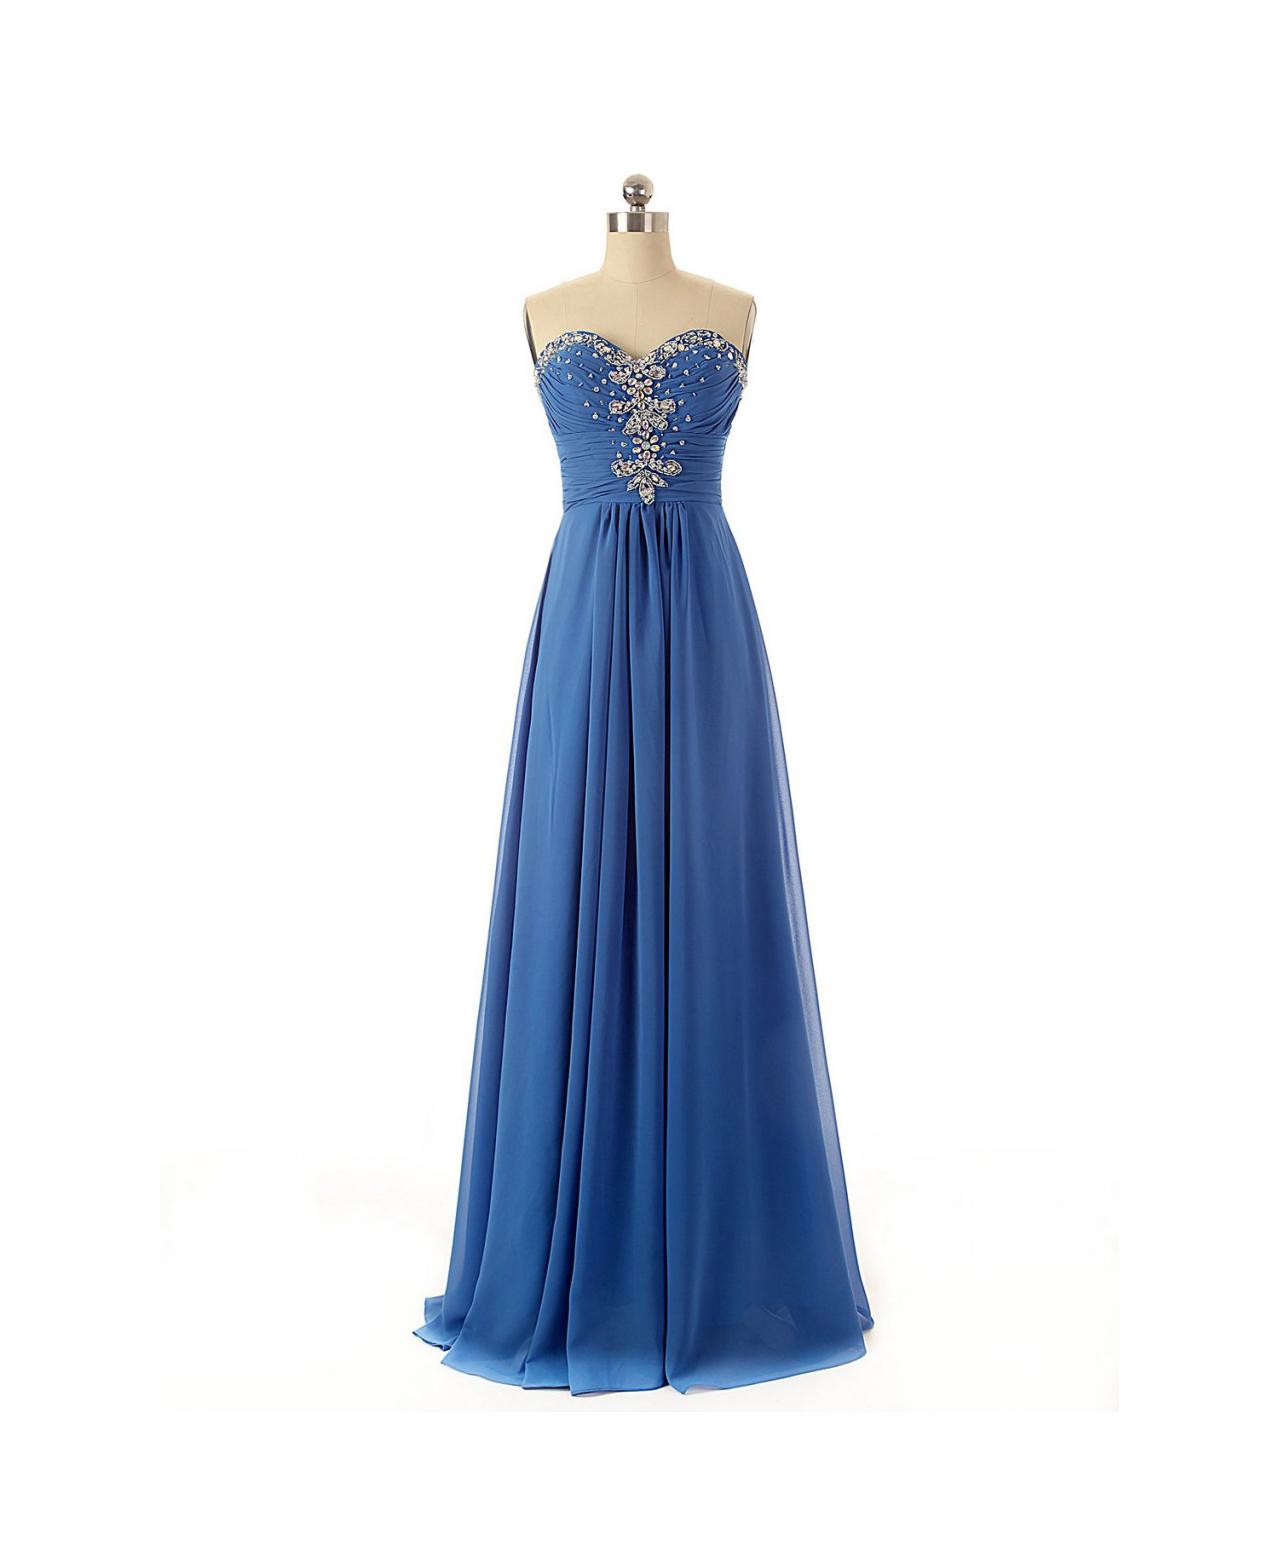 Sweetheart Charming Formal Evening Dresses Long Prom Gown